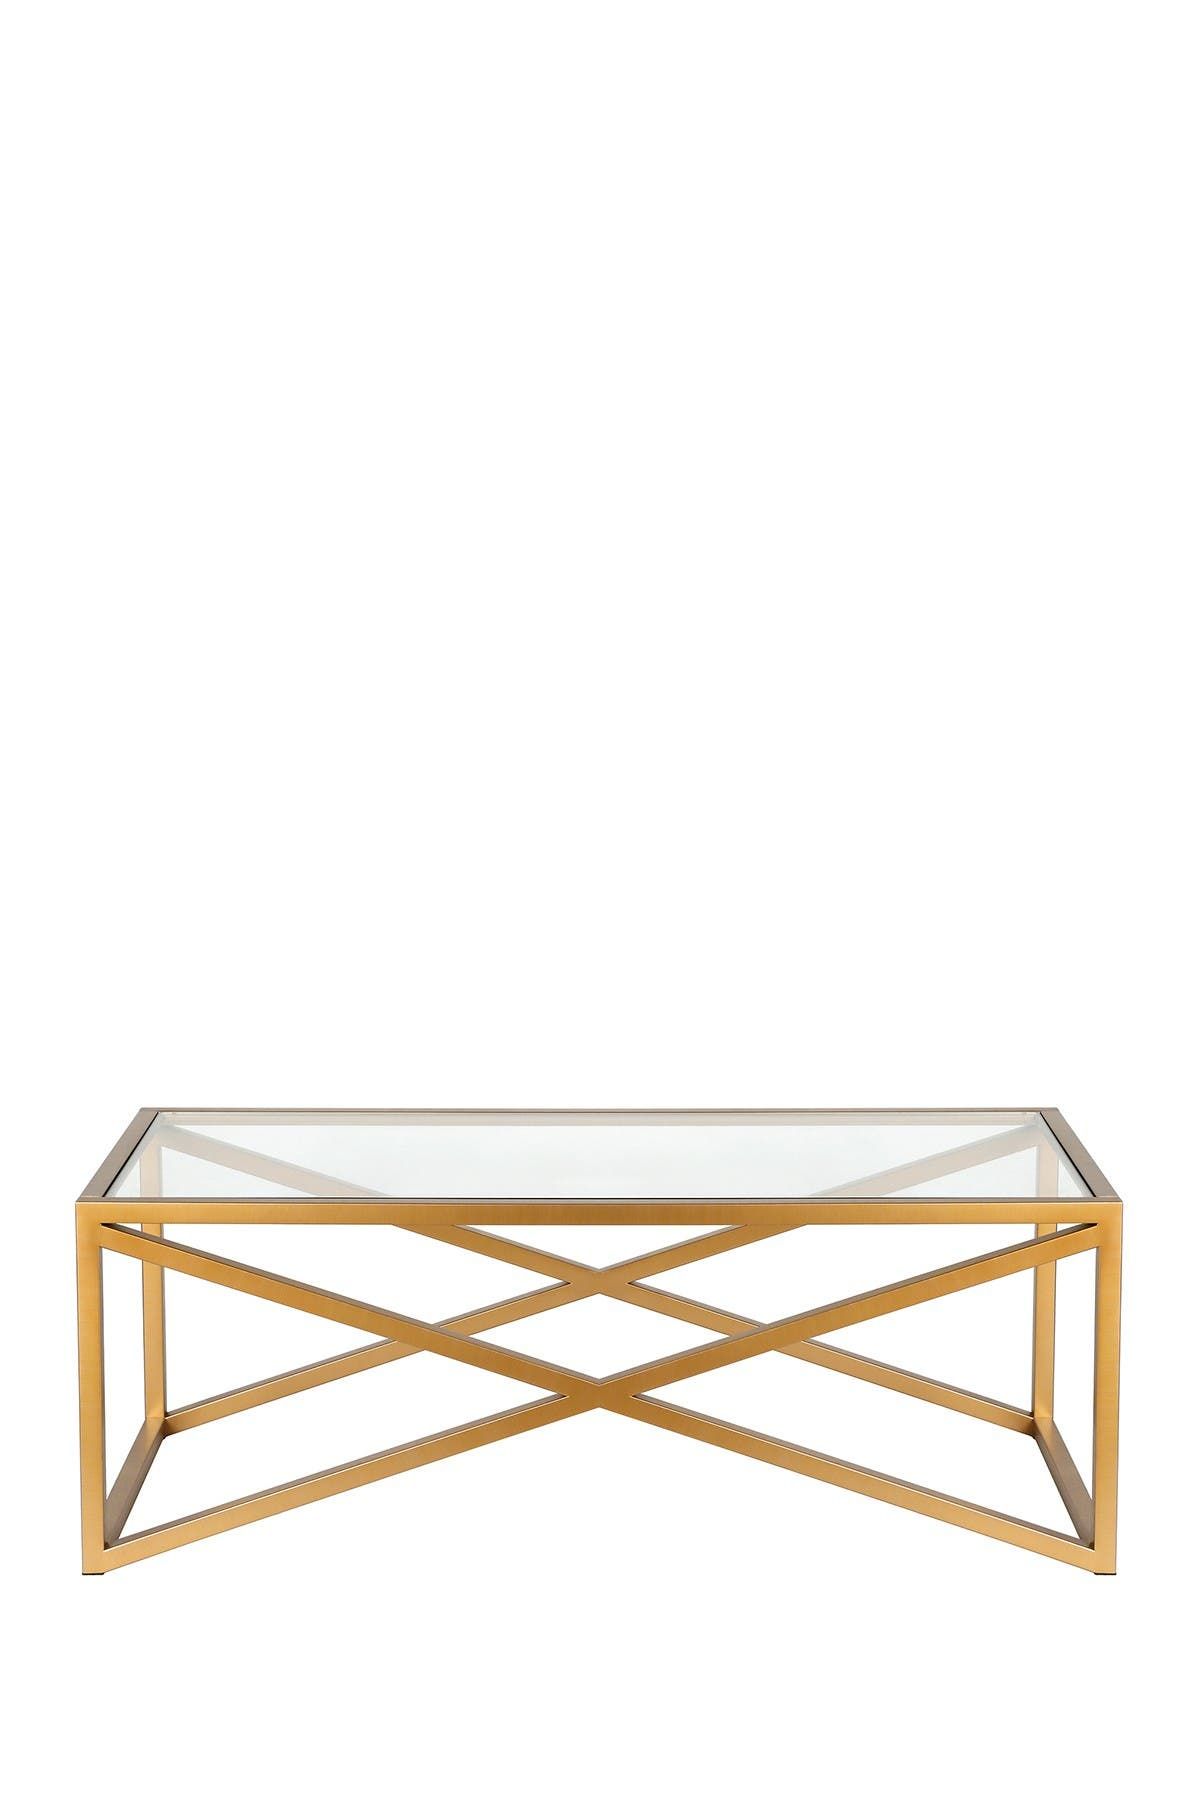 Addison And Lane Calix Brass Finish Coffee Table | Nordstromrack Regarding Addison&amp;lane Calix Square Tables (View 18 of 20)